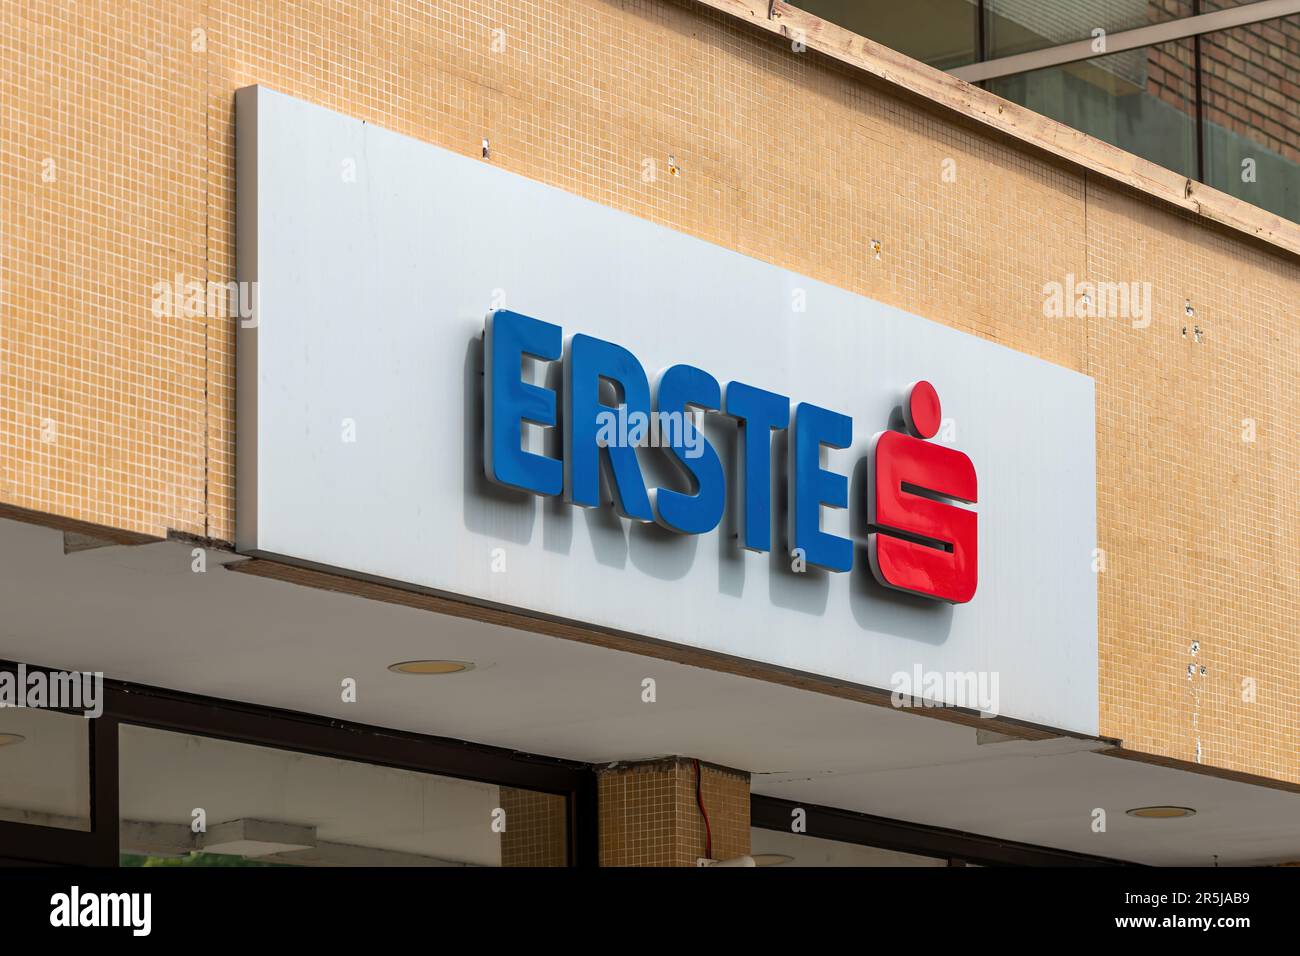 Zrenjanin, Serbia - April 29, 2023: Erste bank logo on building facade, an Austrian financial service provider in Central and Eastern Europe Stock Photo